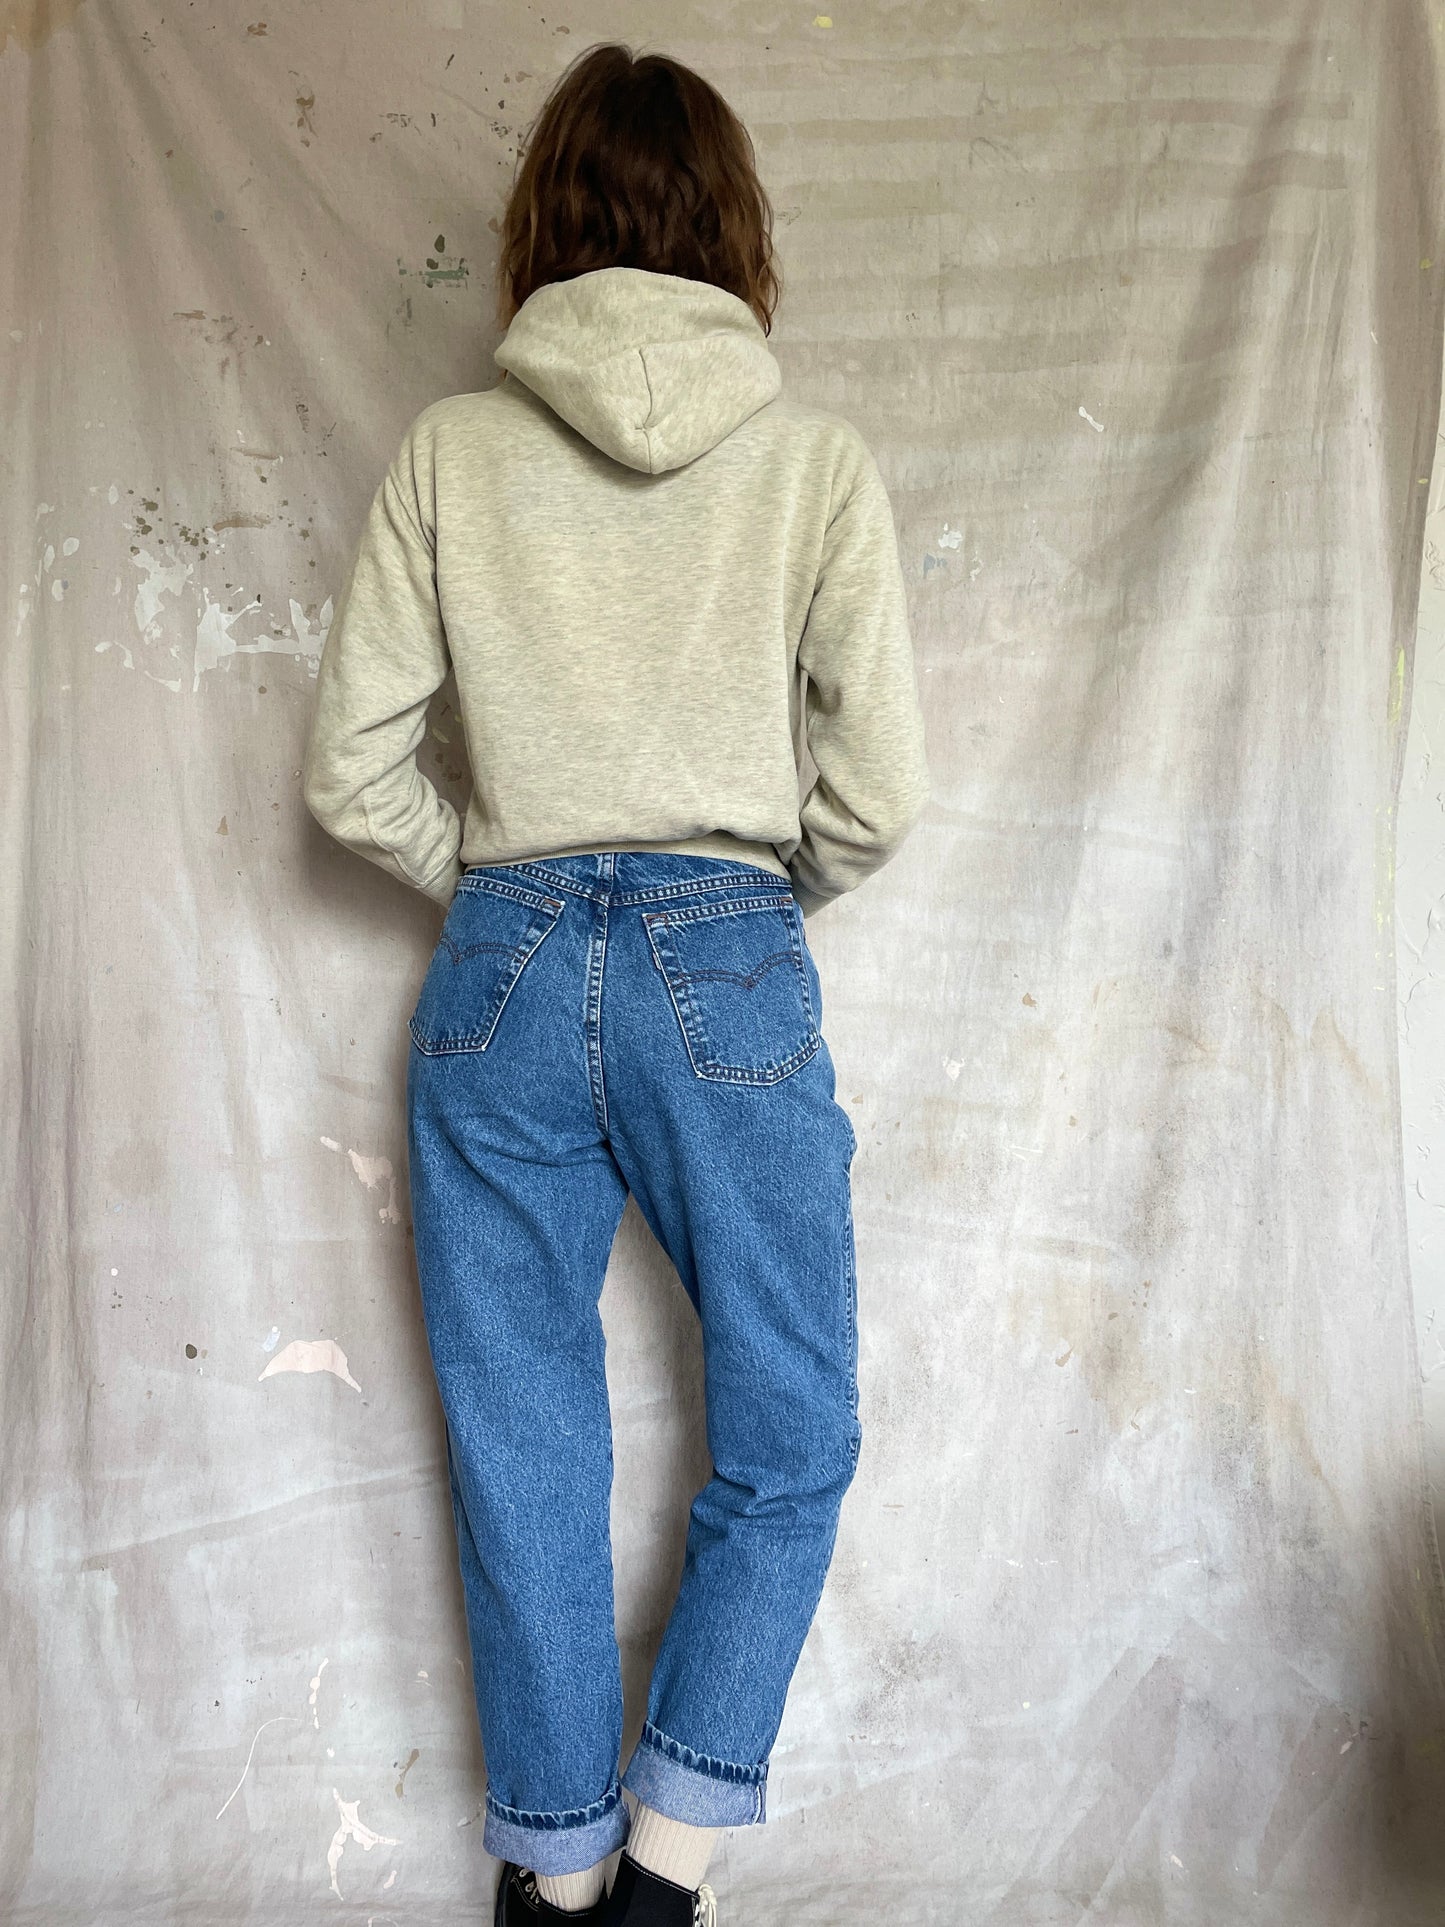 80s Tapered Levi’s Jeans